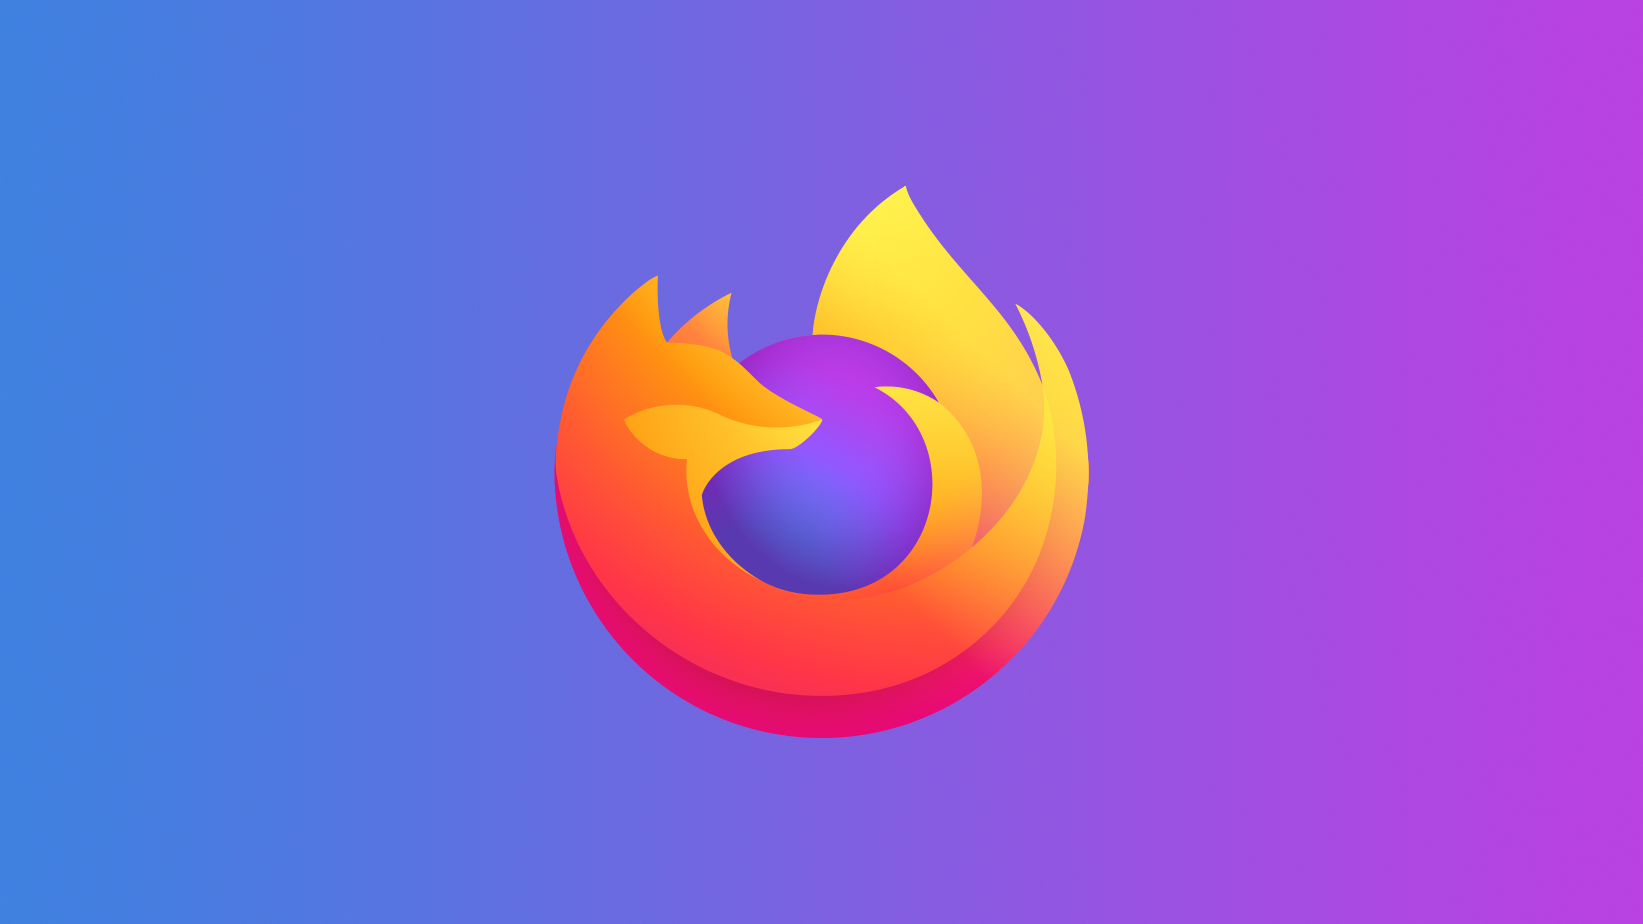 The Mozilla Firefox icon on a blue and purple background